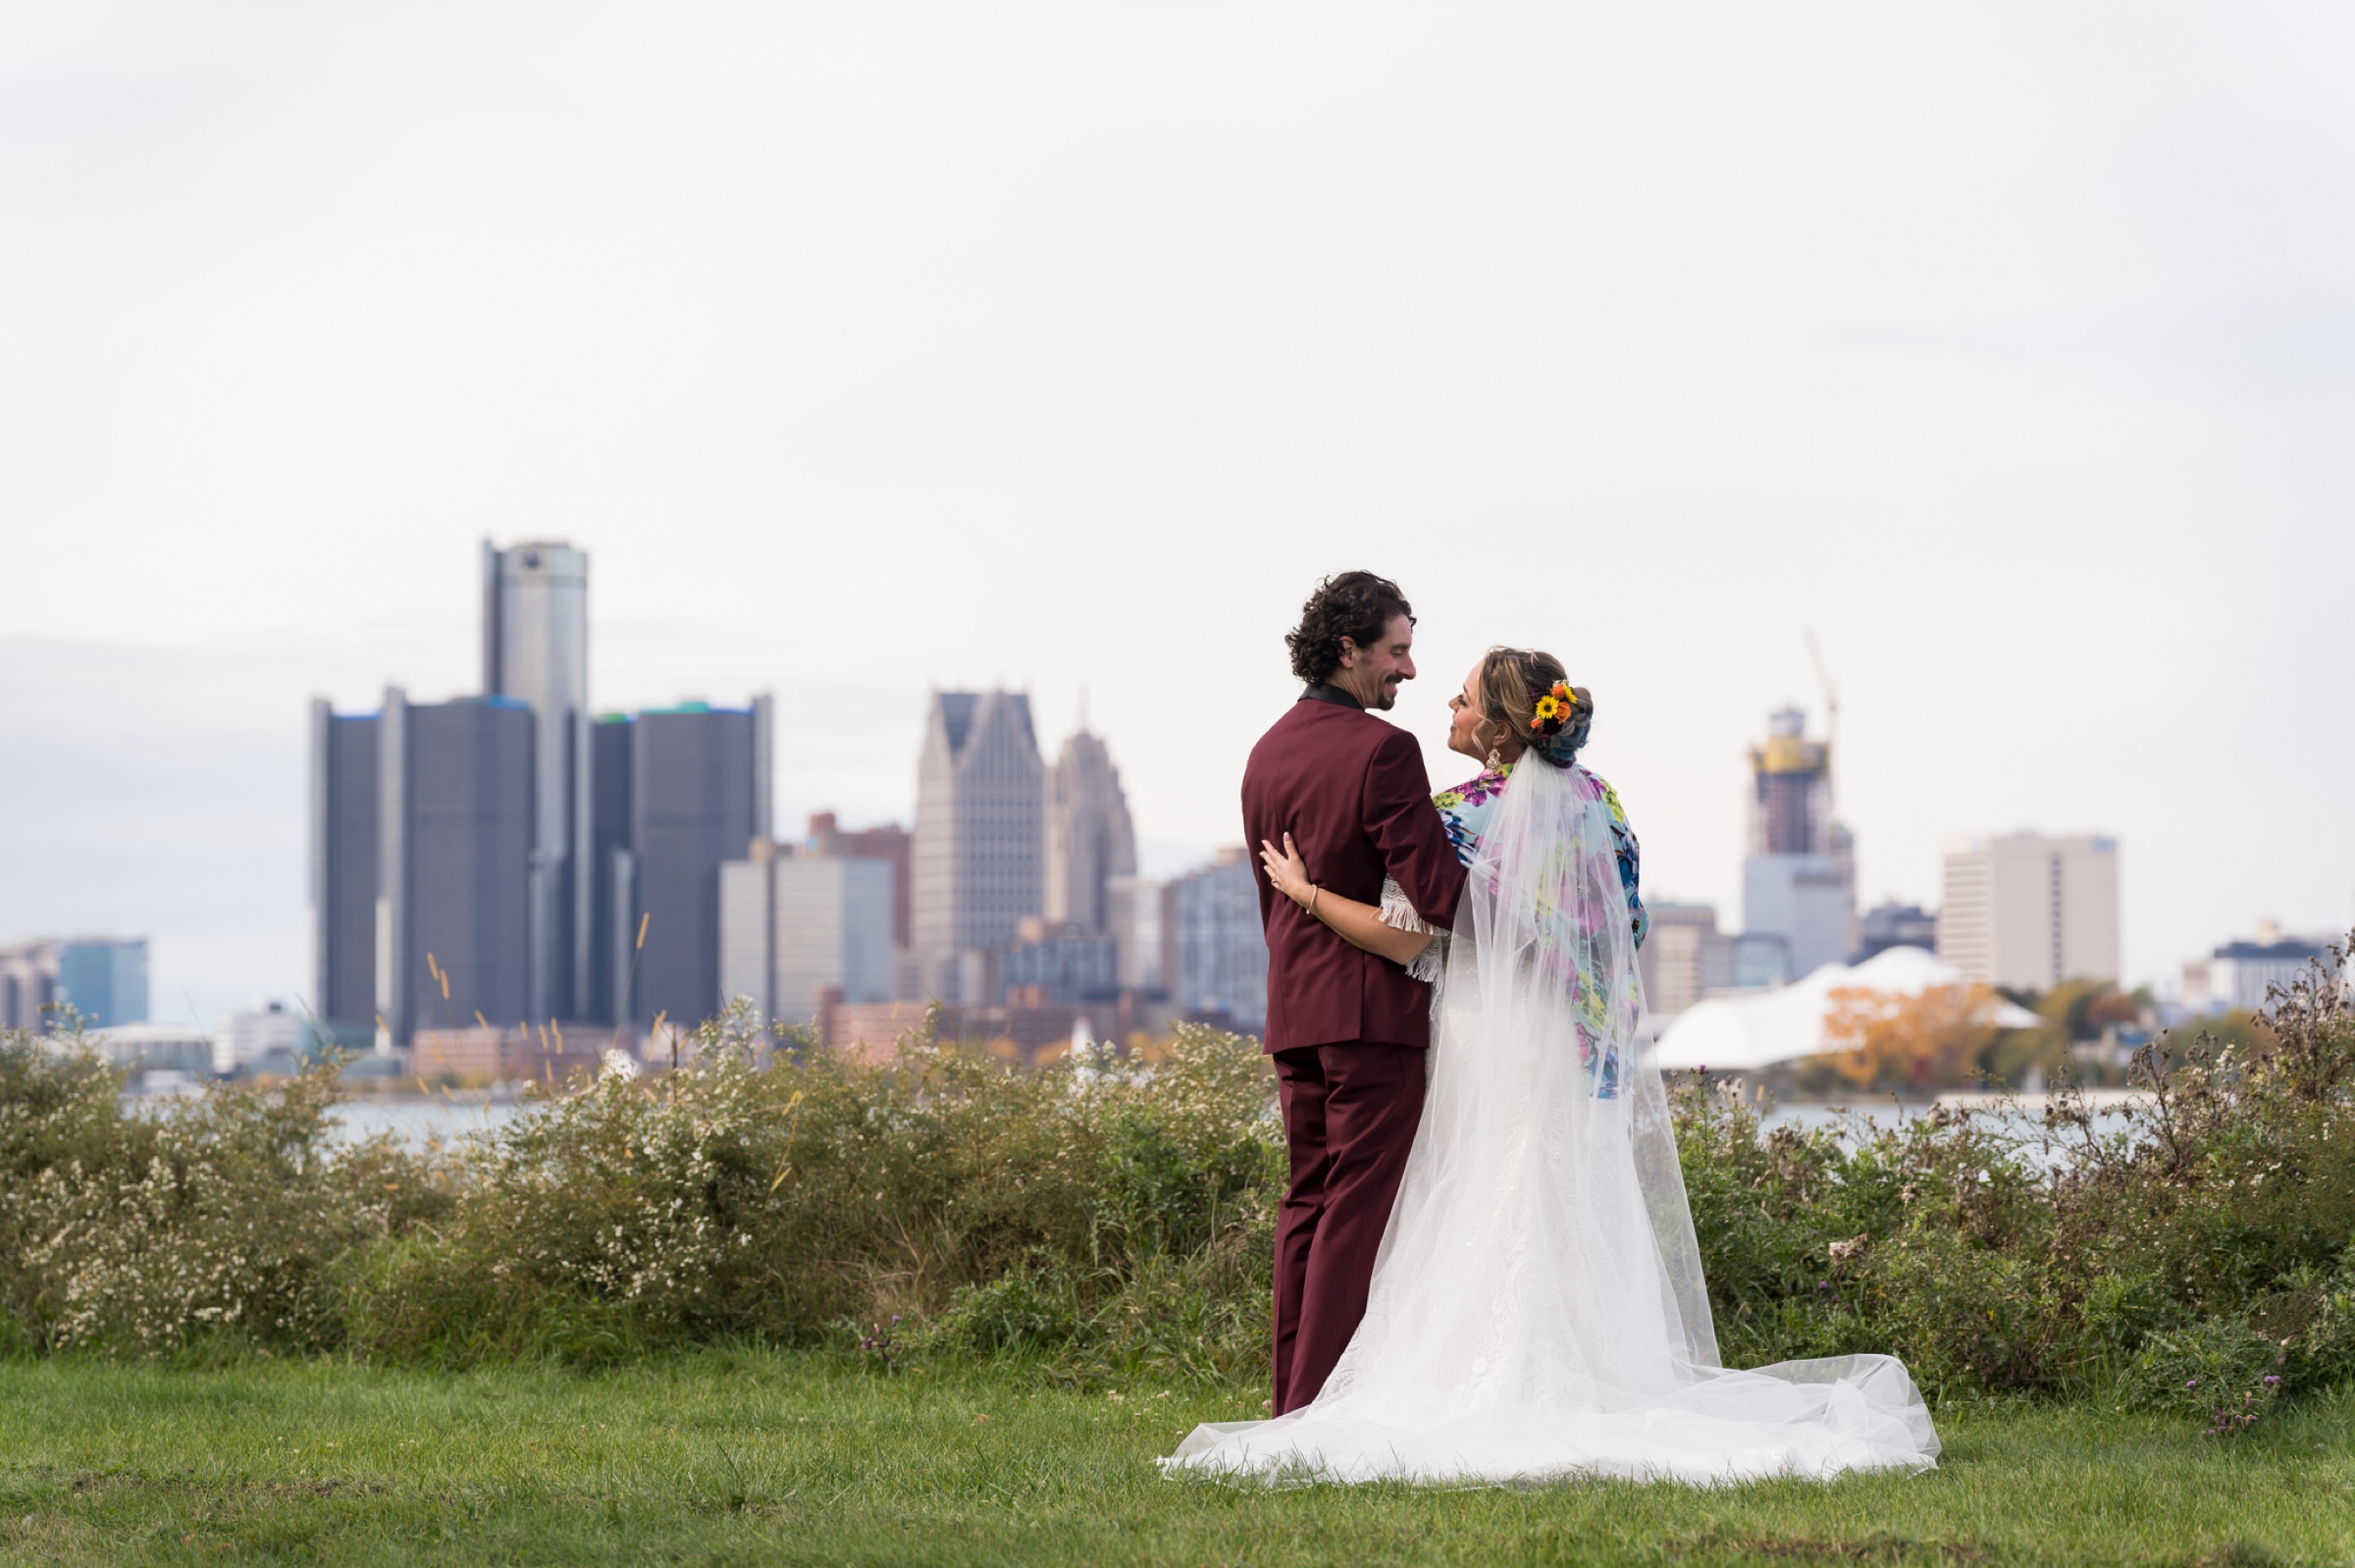 A bride and groom pose with the Detroit skyline in the background.  